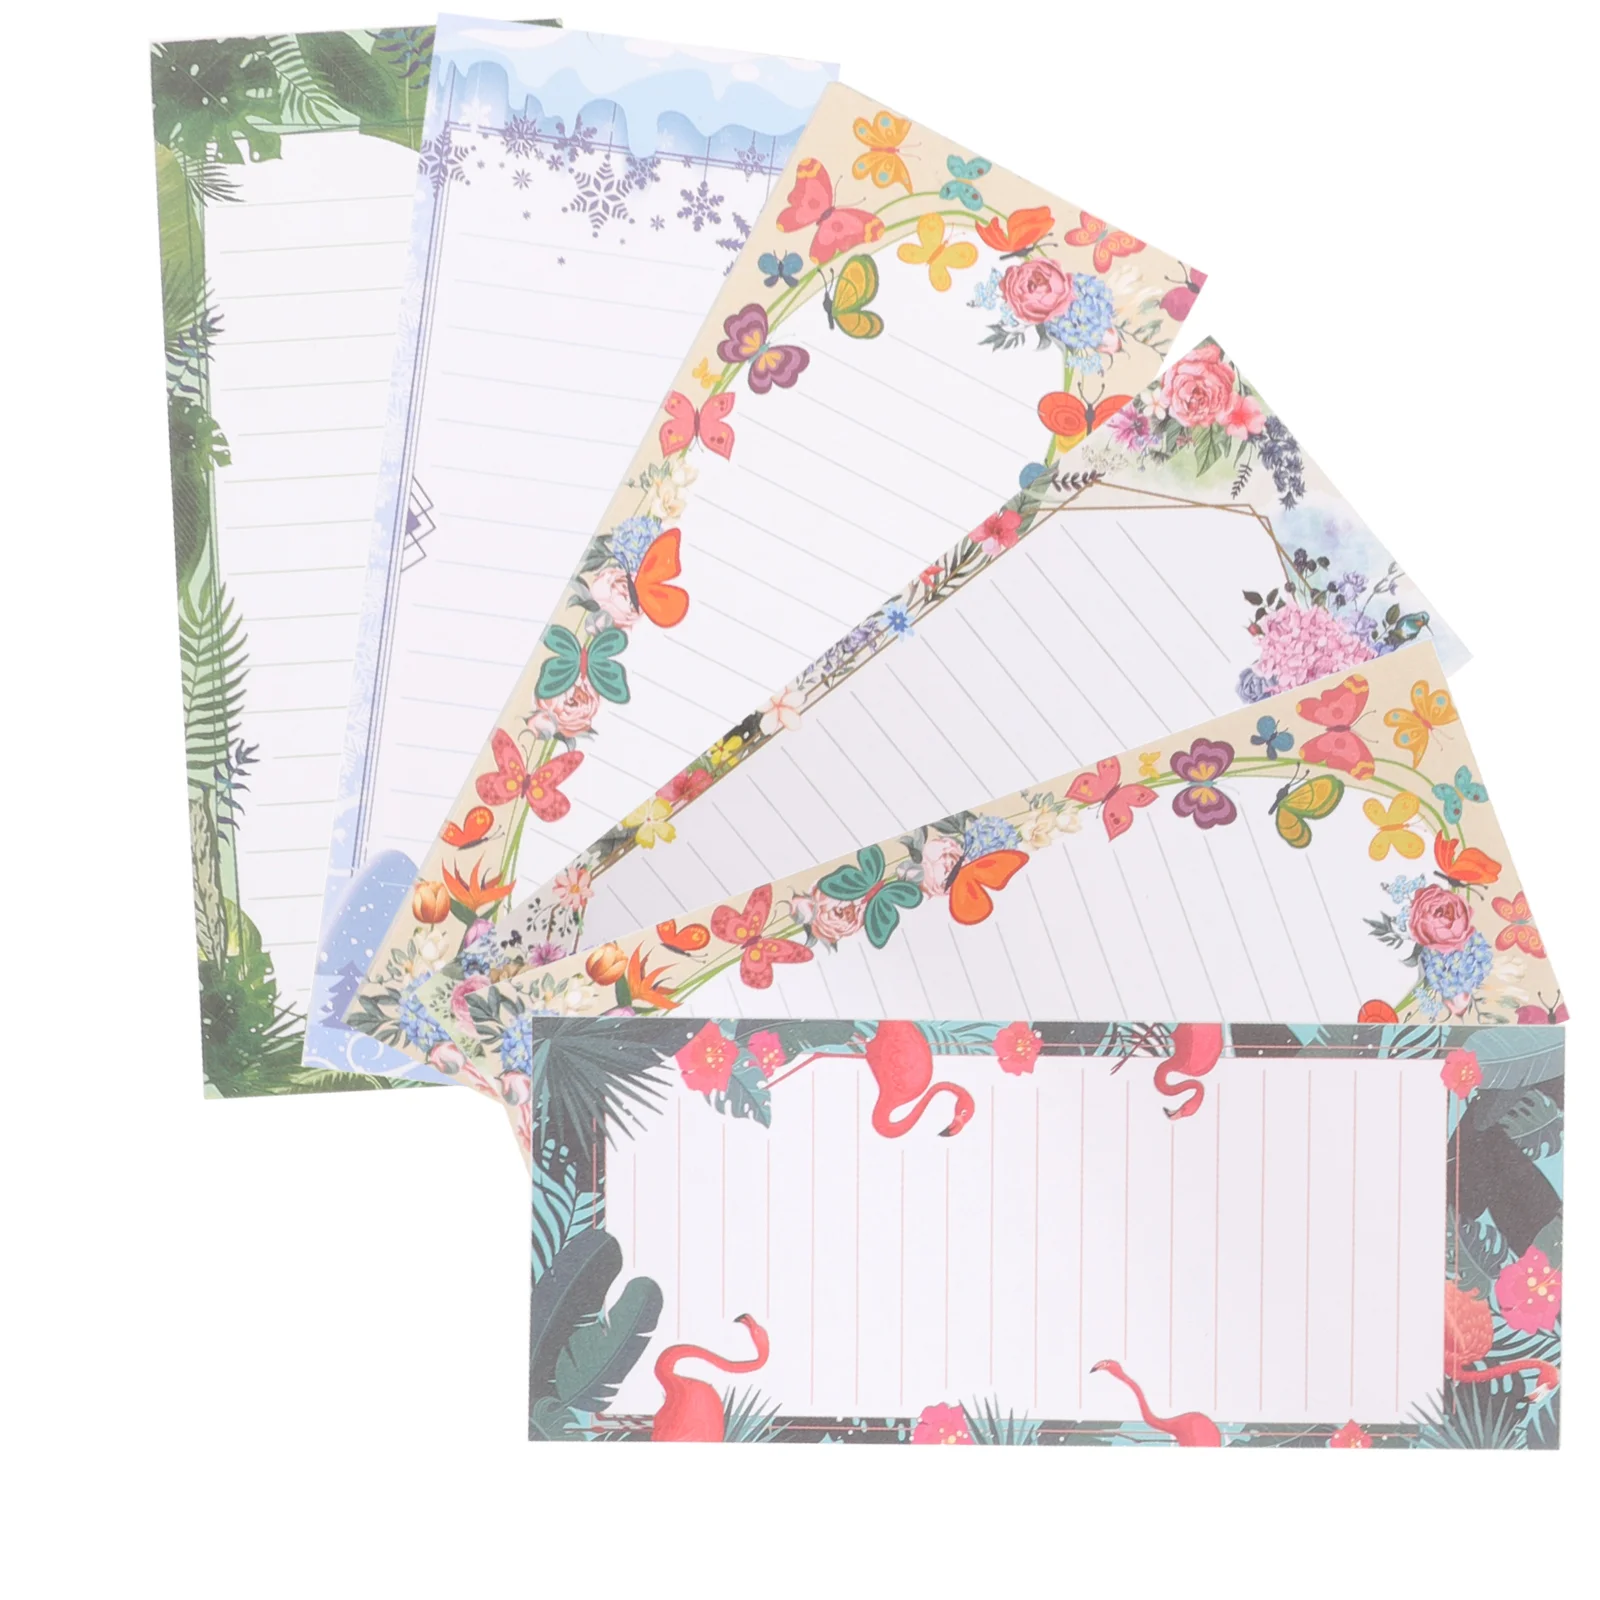 6pcs Magnetic Notepads Grocery List Shopping List Notepads with Magnet Fridge Memo Notepads flower sereise to do list refrigerator memo magnetic note pad fridge memo pad grocery shopping list pad magnetic notepads